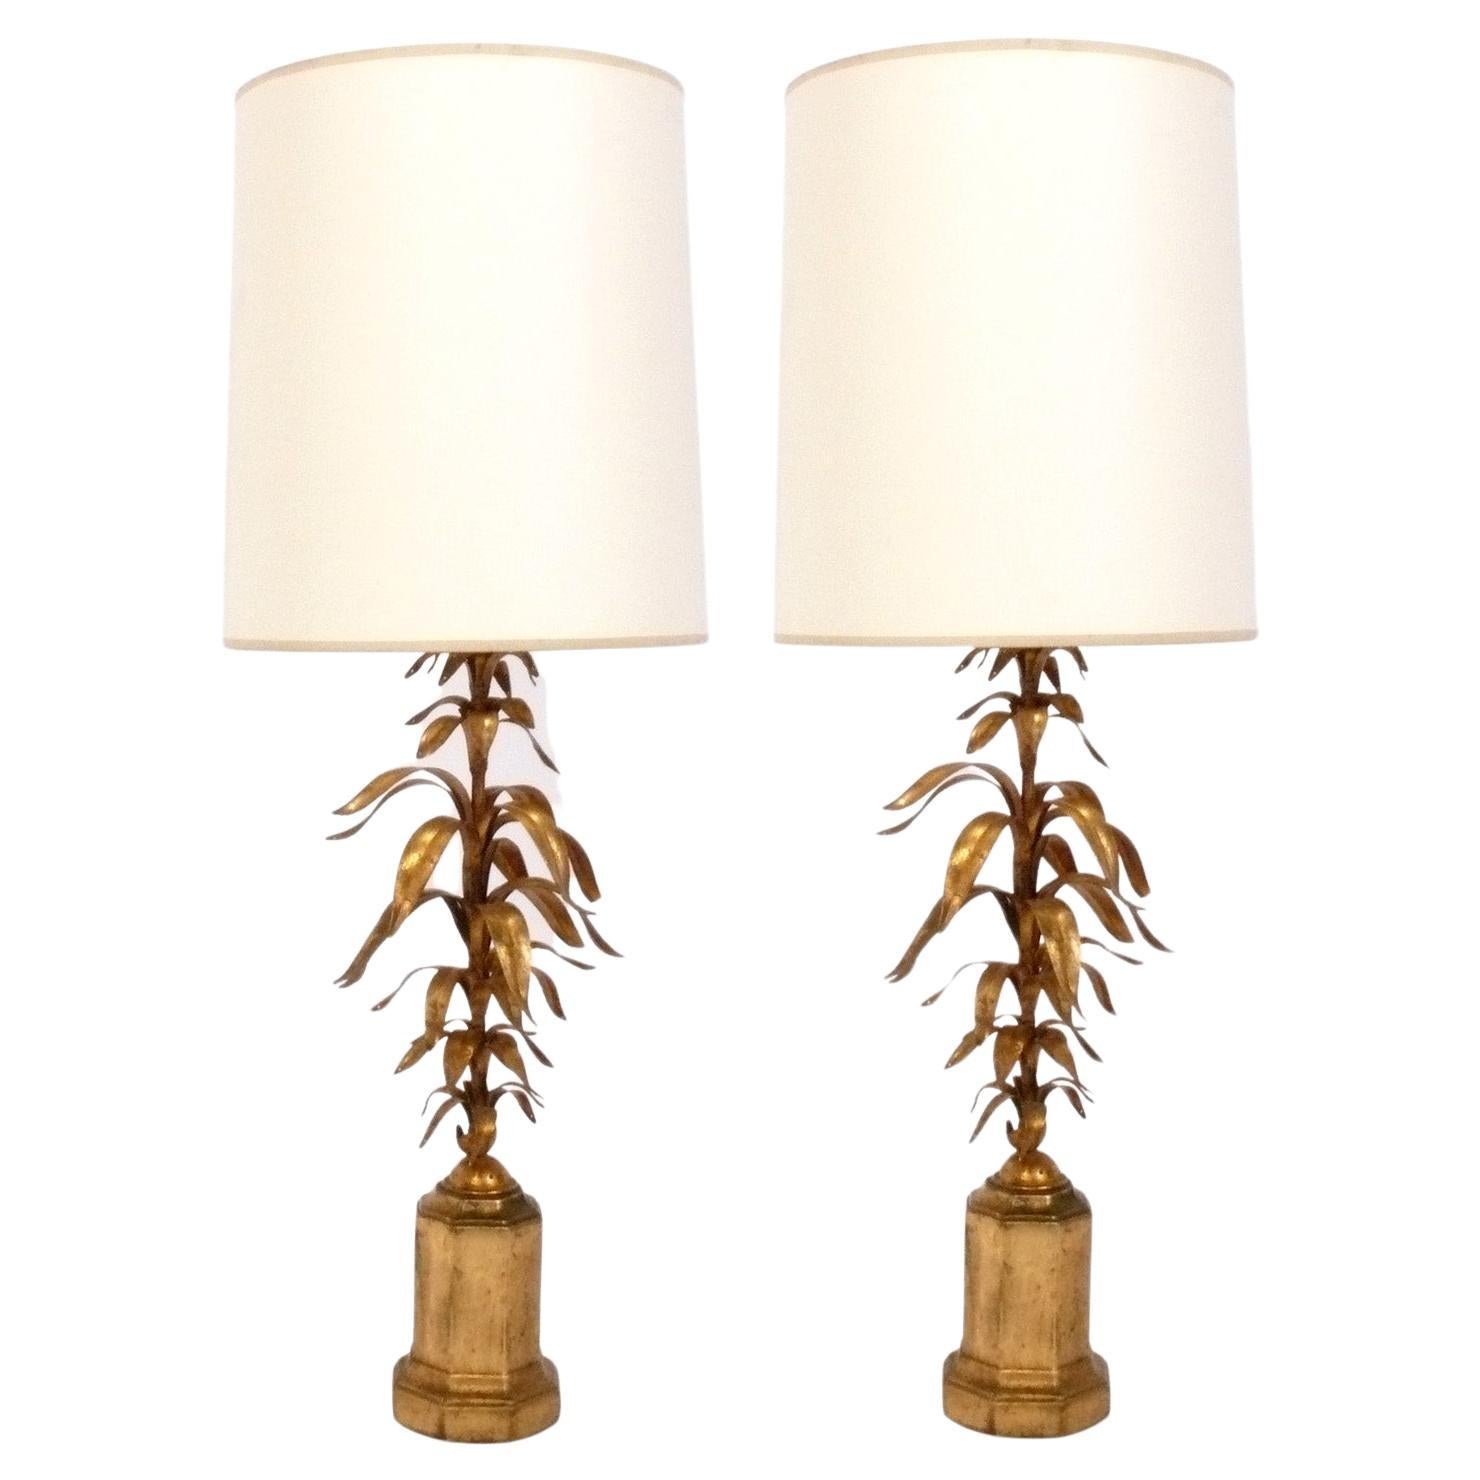 Pair of Gilt French Floriform Lamps attributed to Maison Bagues